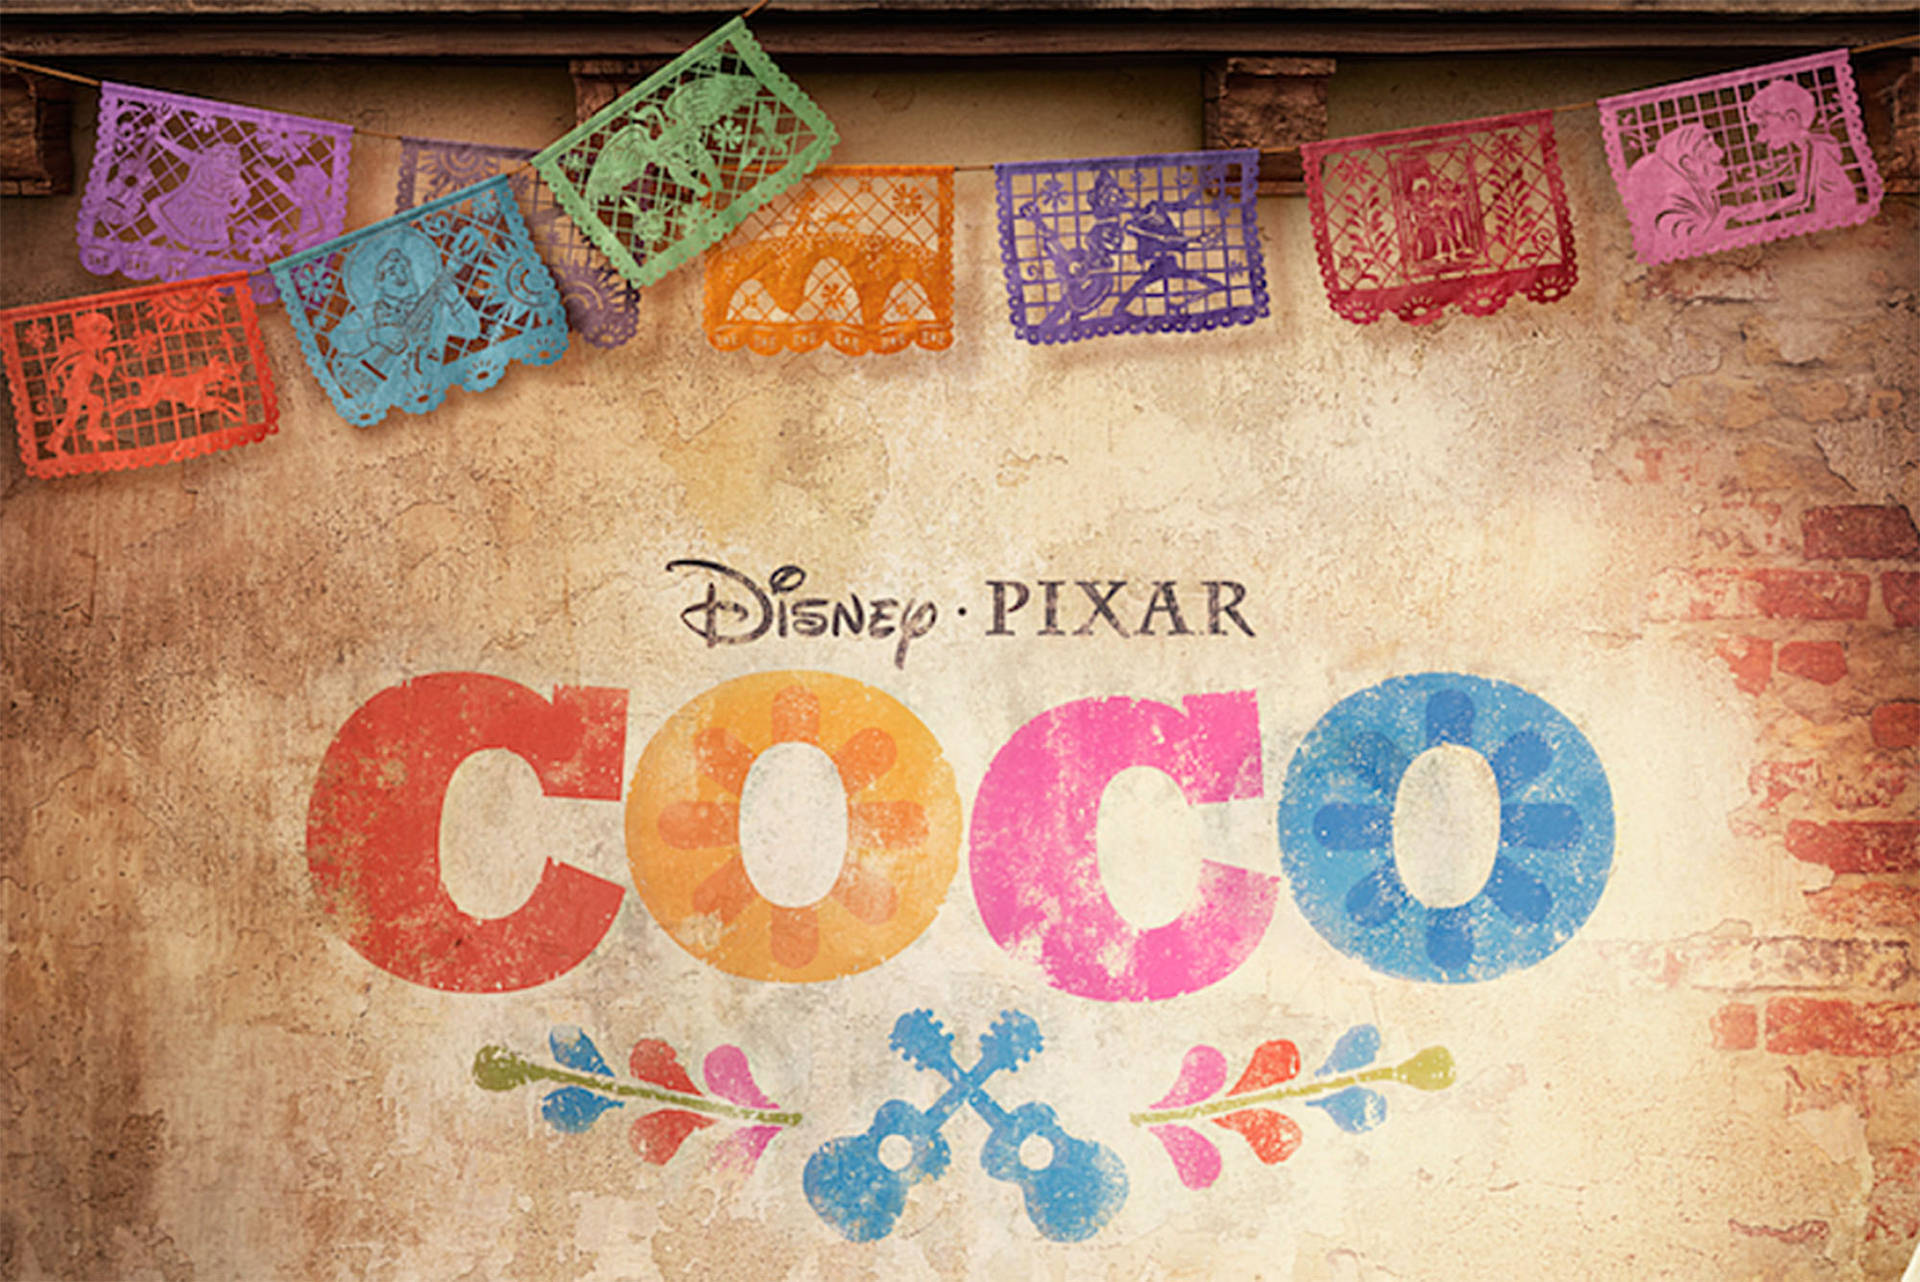 Artistic Digital Art Of Coco Title Background